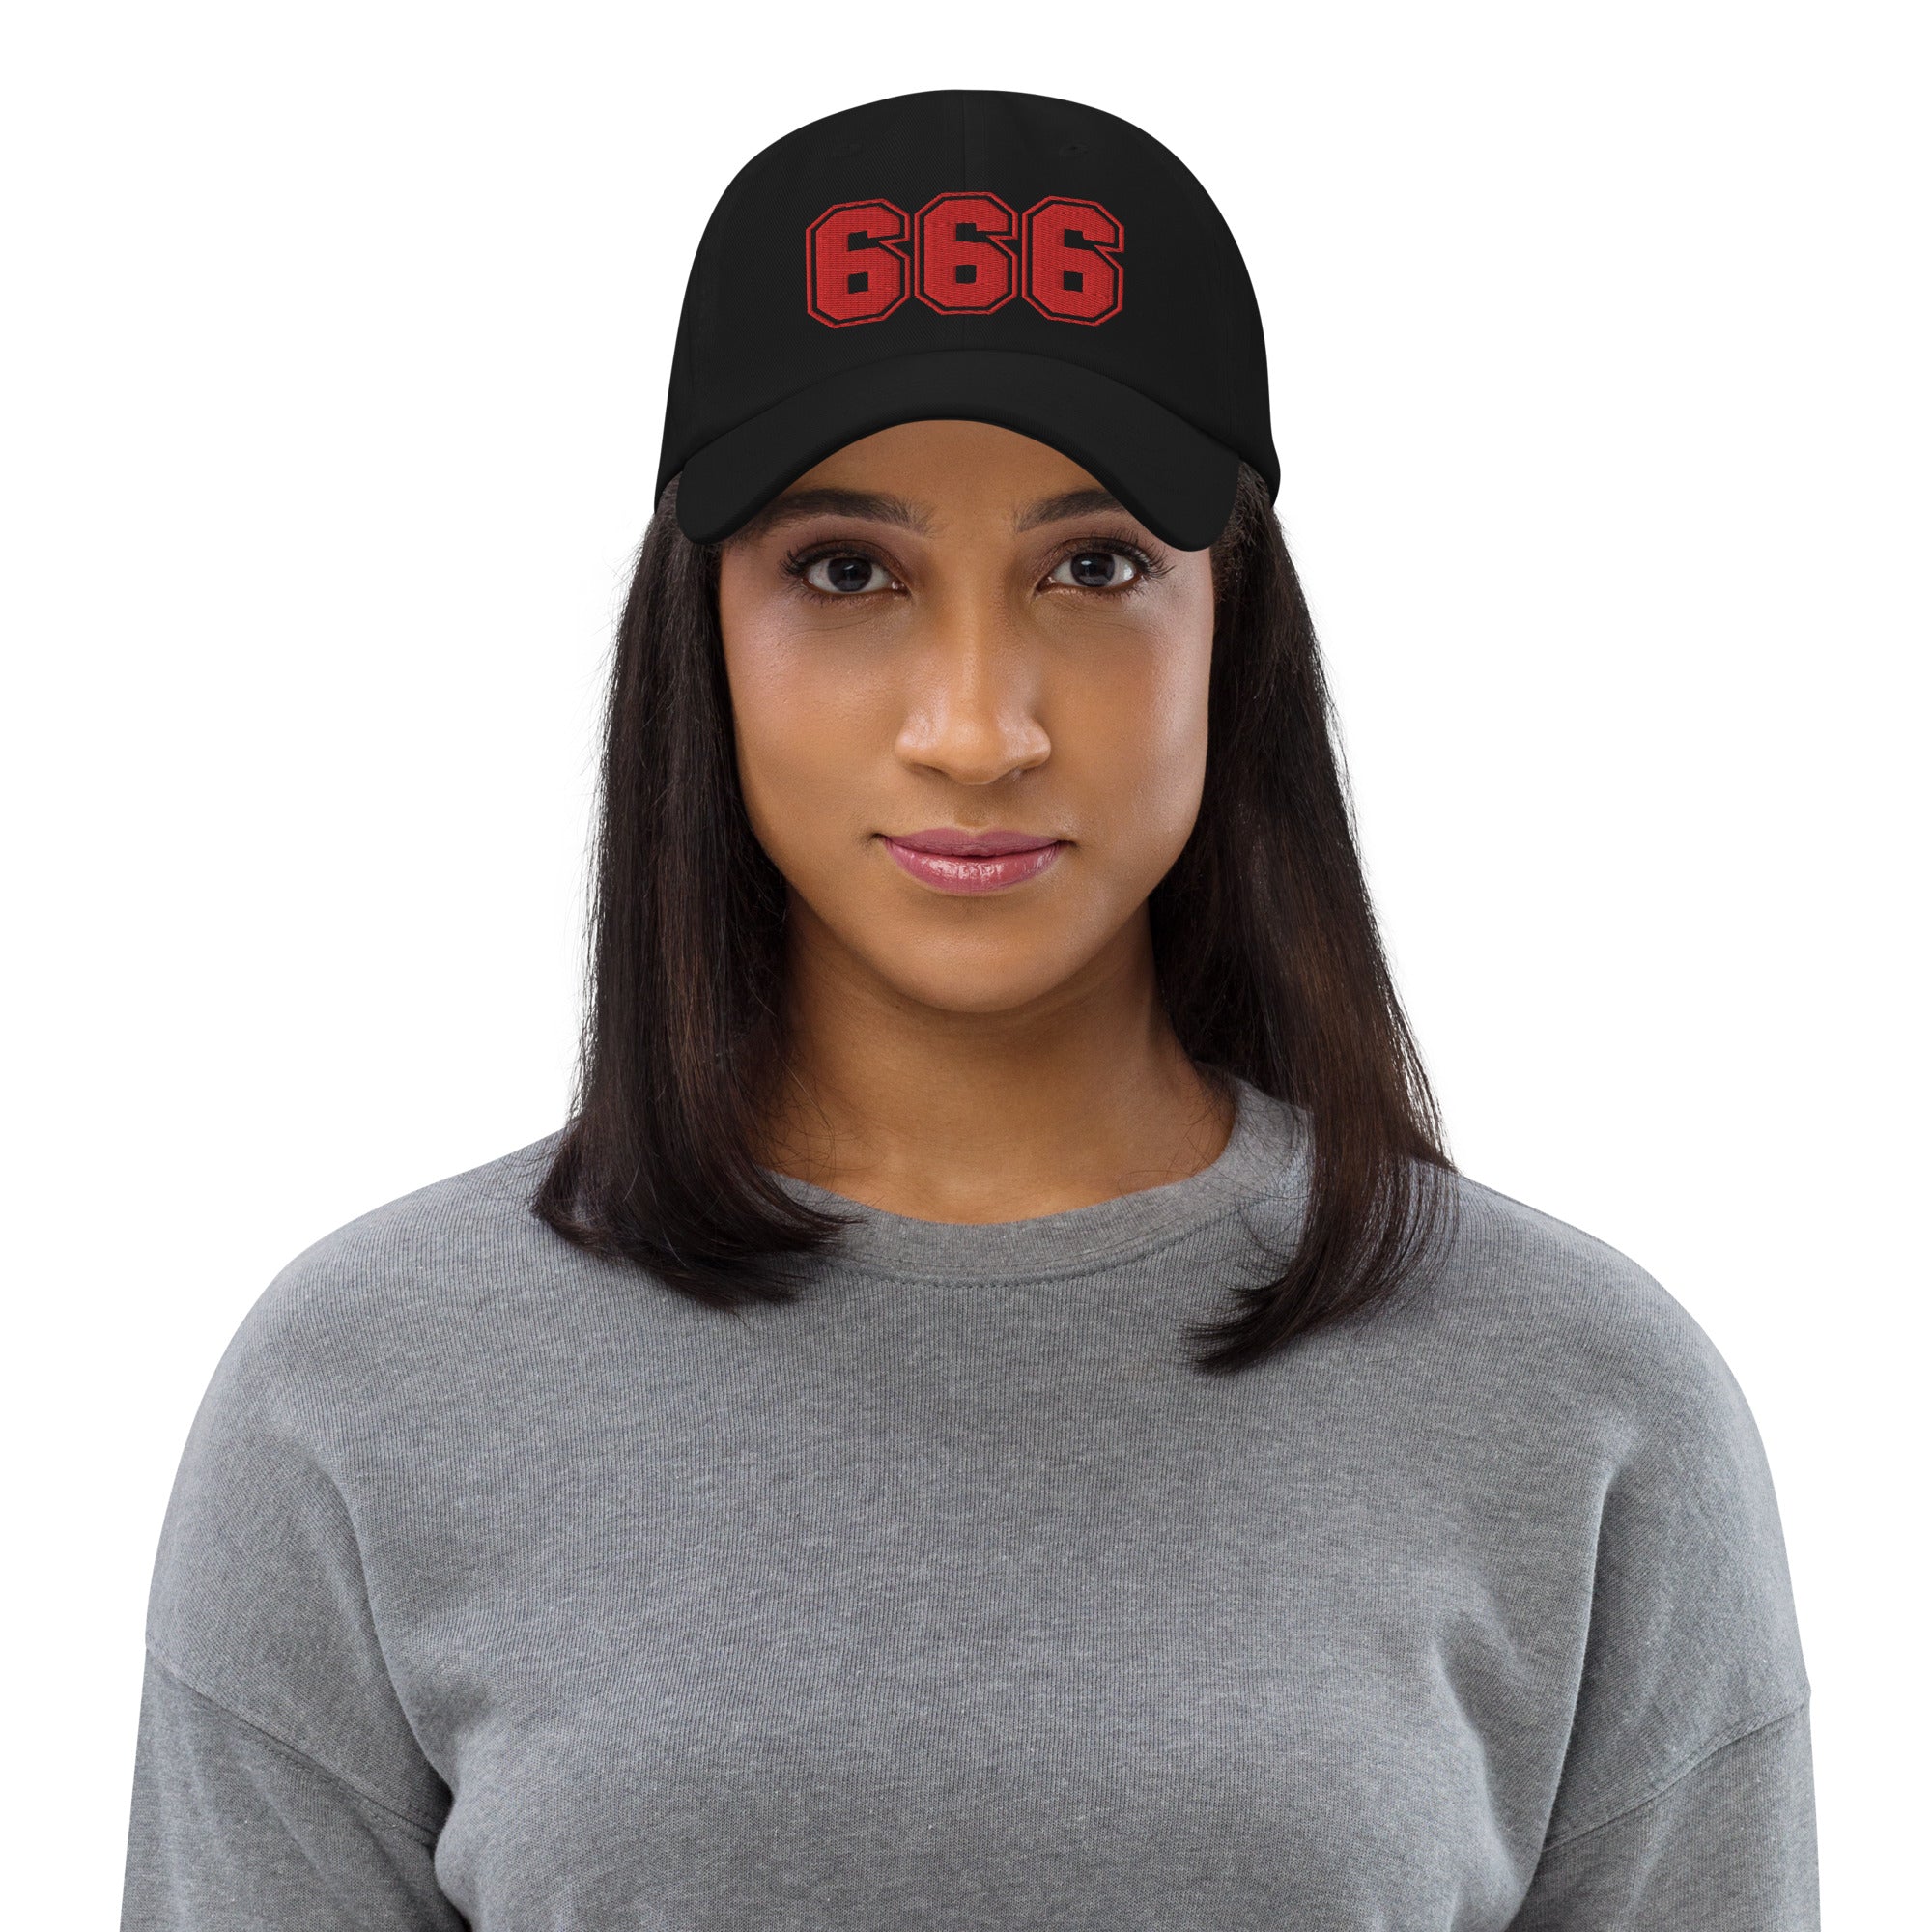 666 The Number of the Beast Evil Embroidered Baseball Cap Dad hat Red Thread - Edge of Life Designs